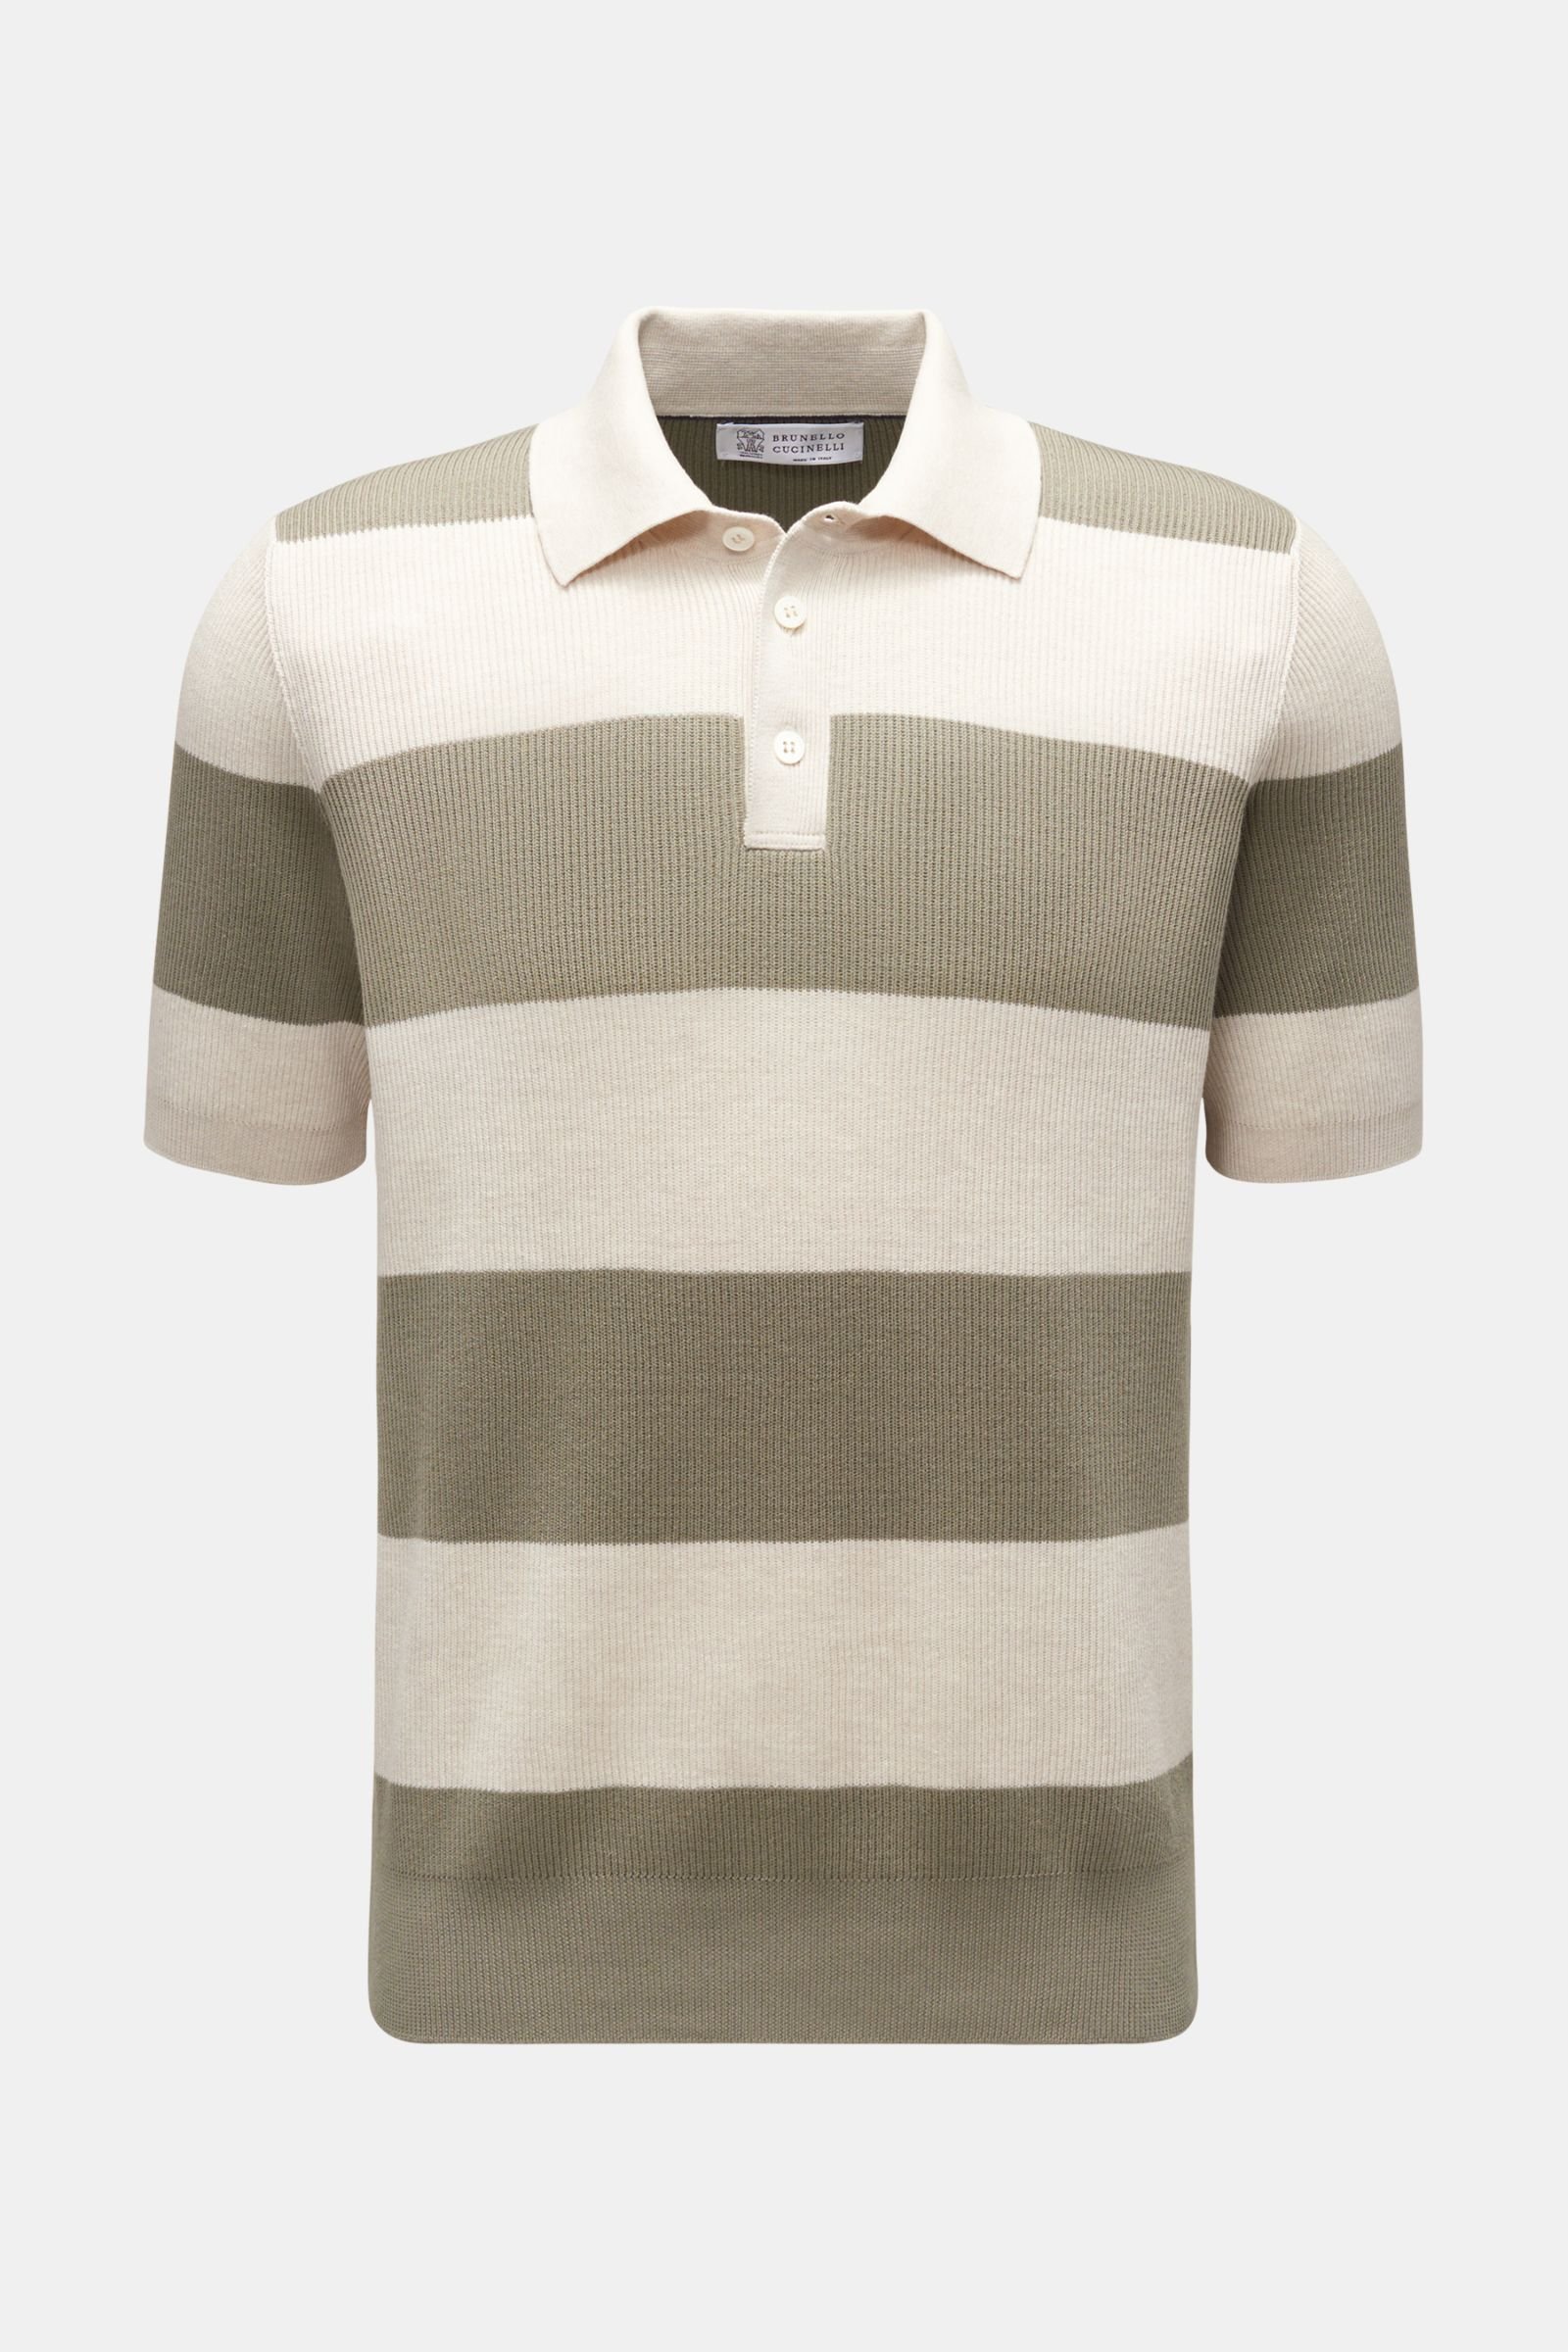 Short sleeve knit polo olive/cream striped 